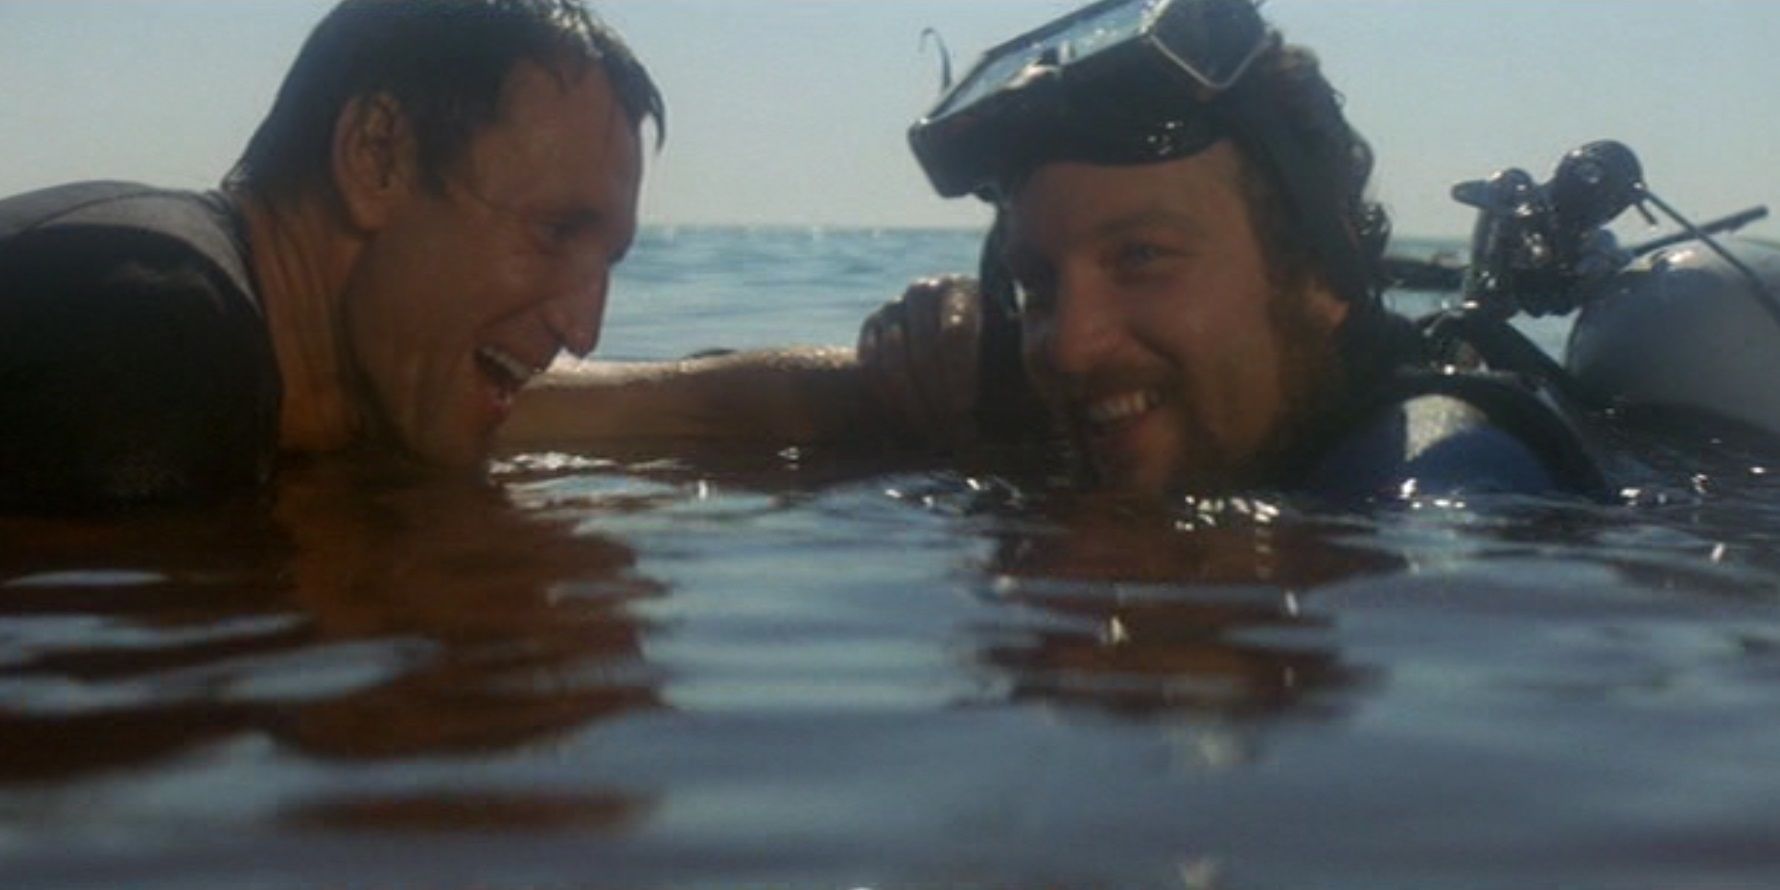 Chief Brody and Hooper swimming in the ocean in Jaws